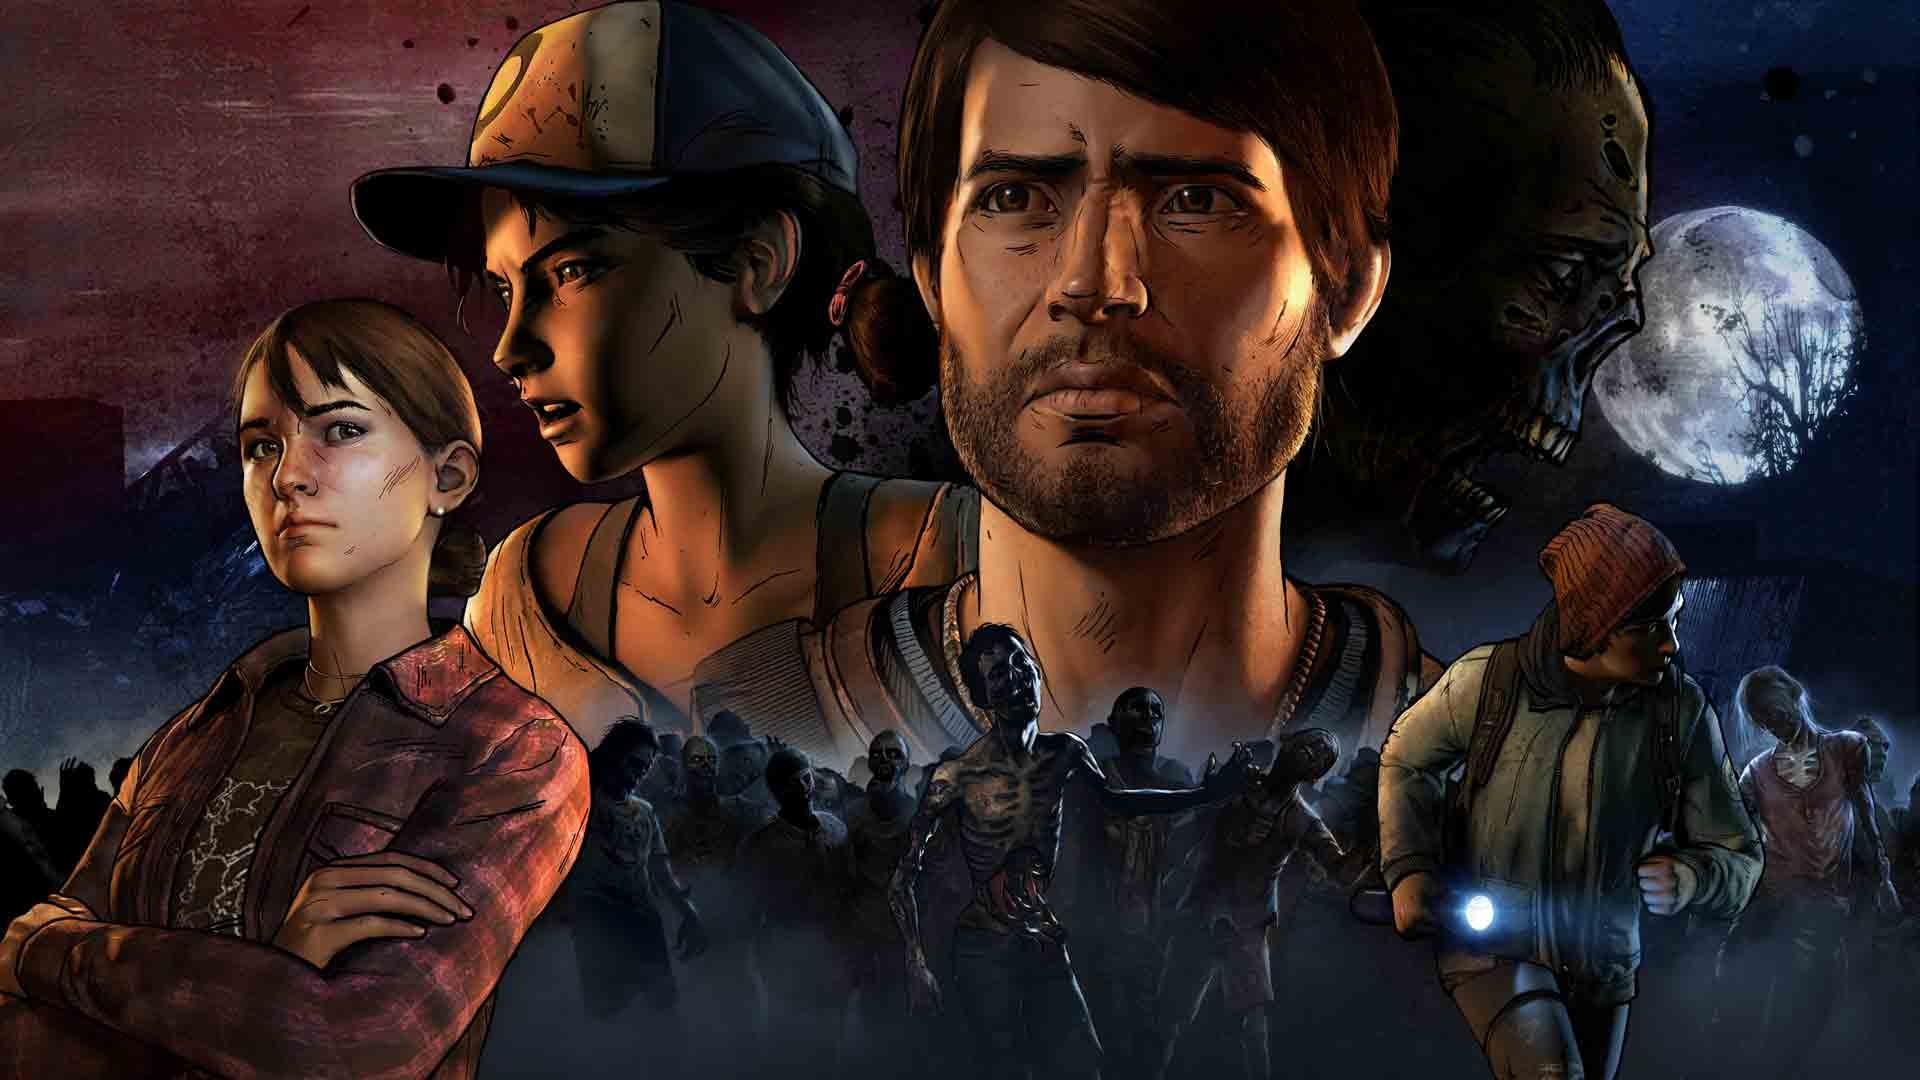 1920x1080 PAX East 2017: Telltale Games' The Walking Dead: A New Frontier Episode 3  Release Date Announced - The Walking Dead: A Telltale Game Series -- Season  Three ...